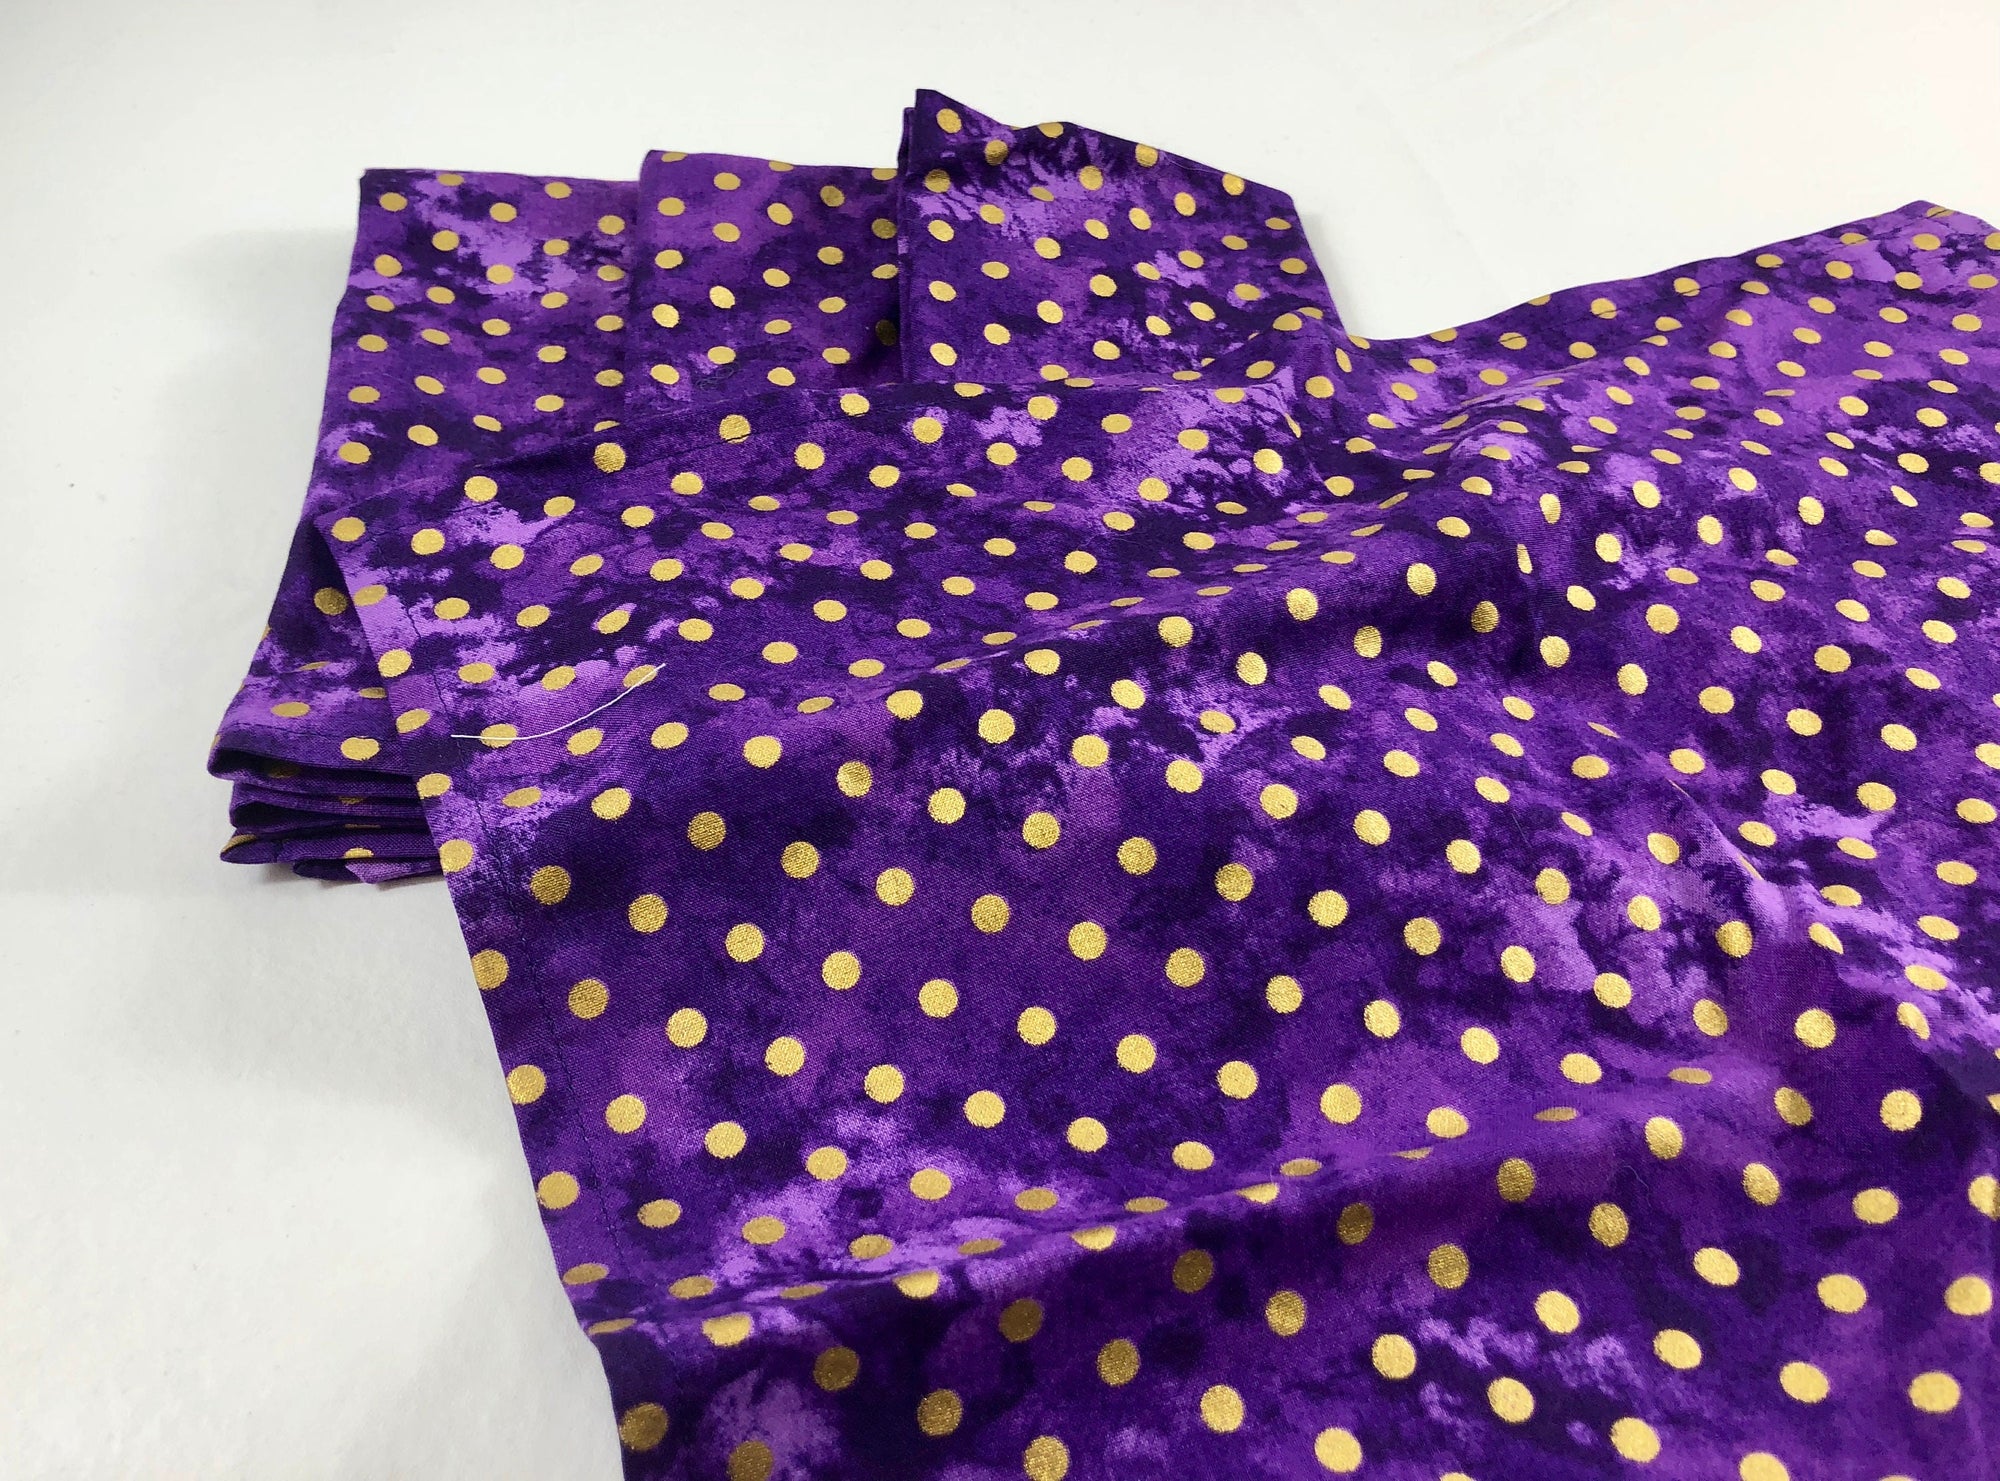 Purple with gold dots  napkins set of 4 fabric eco-friendly napkins 17 inch square